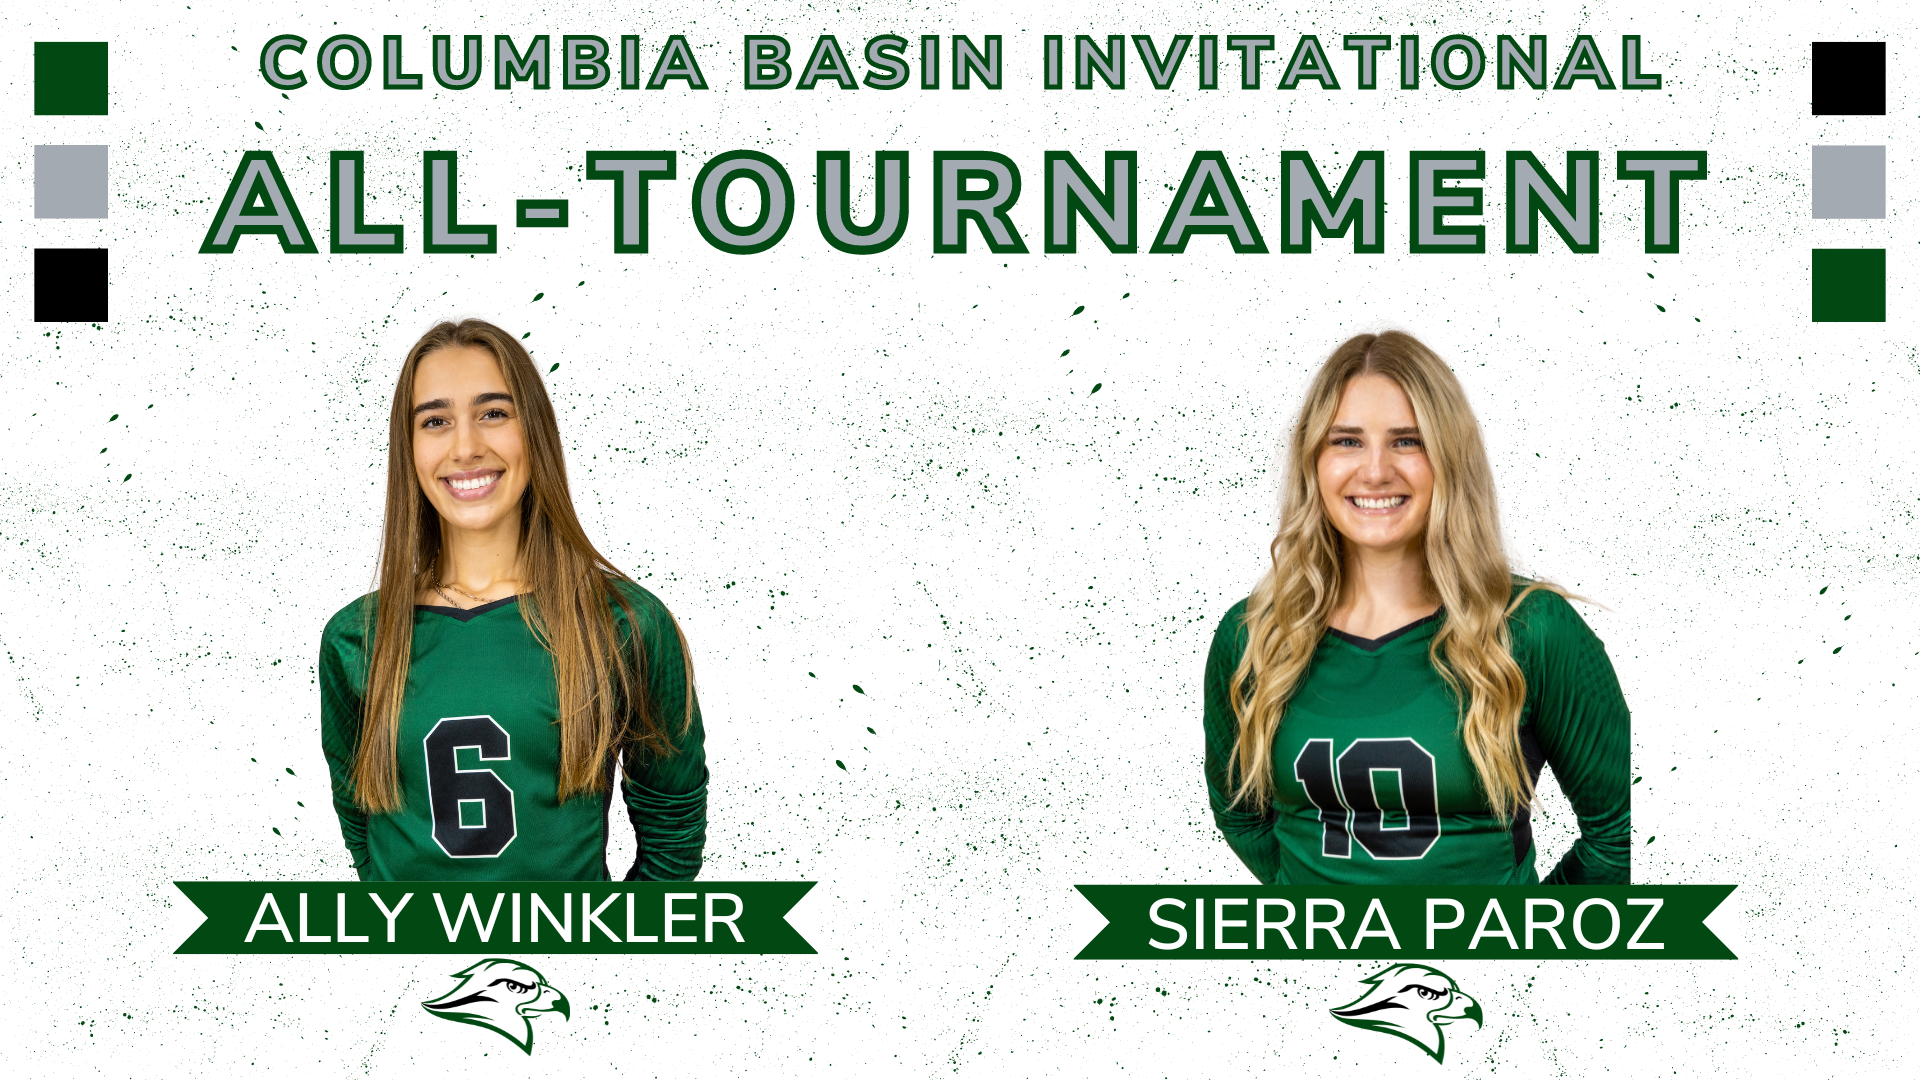 Winkler and Paroz named All-Tournament